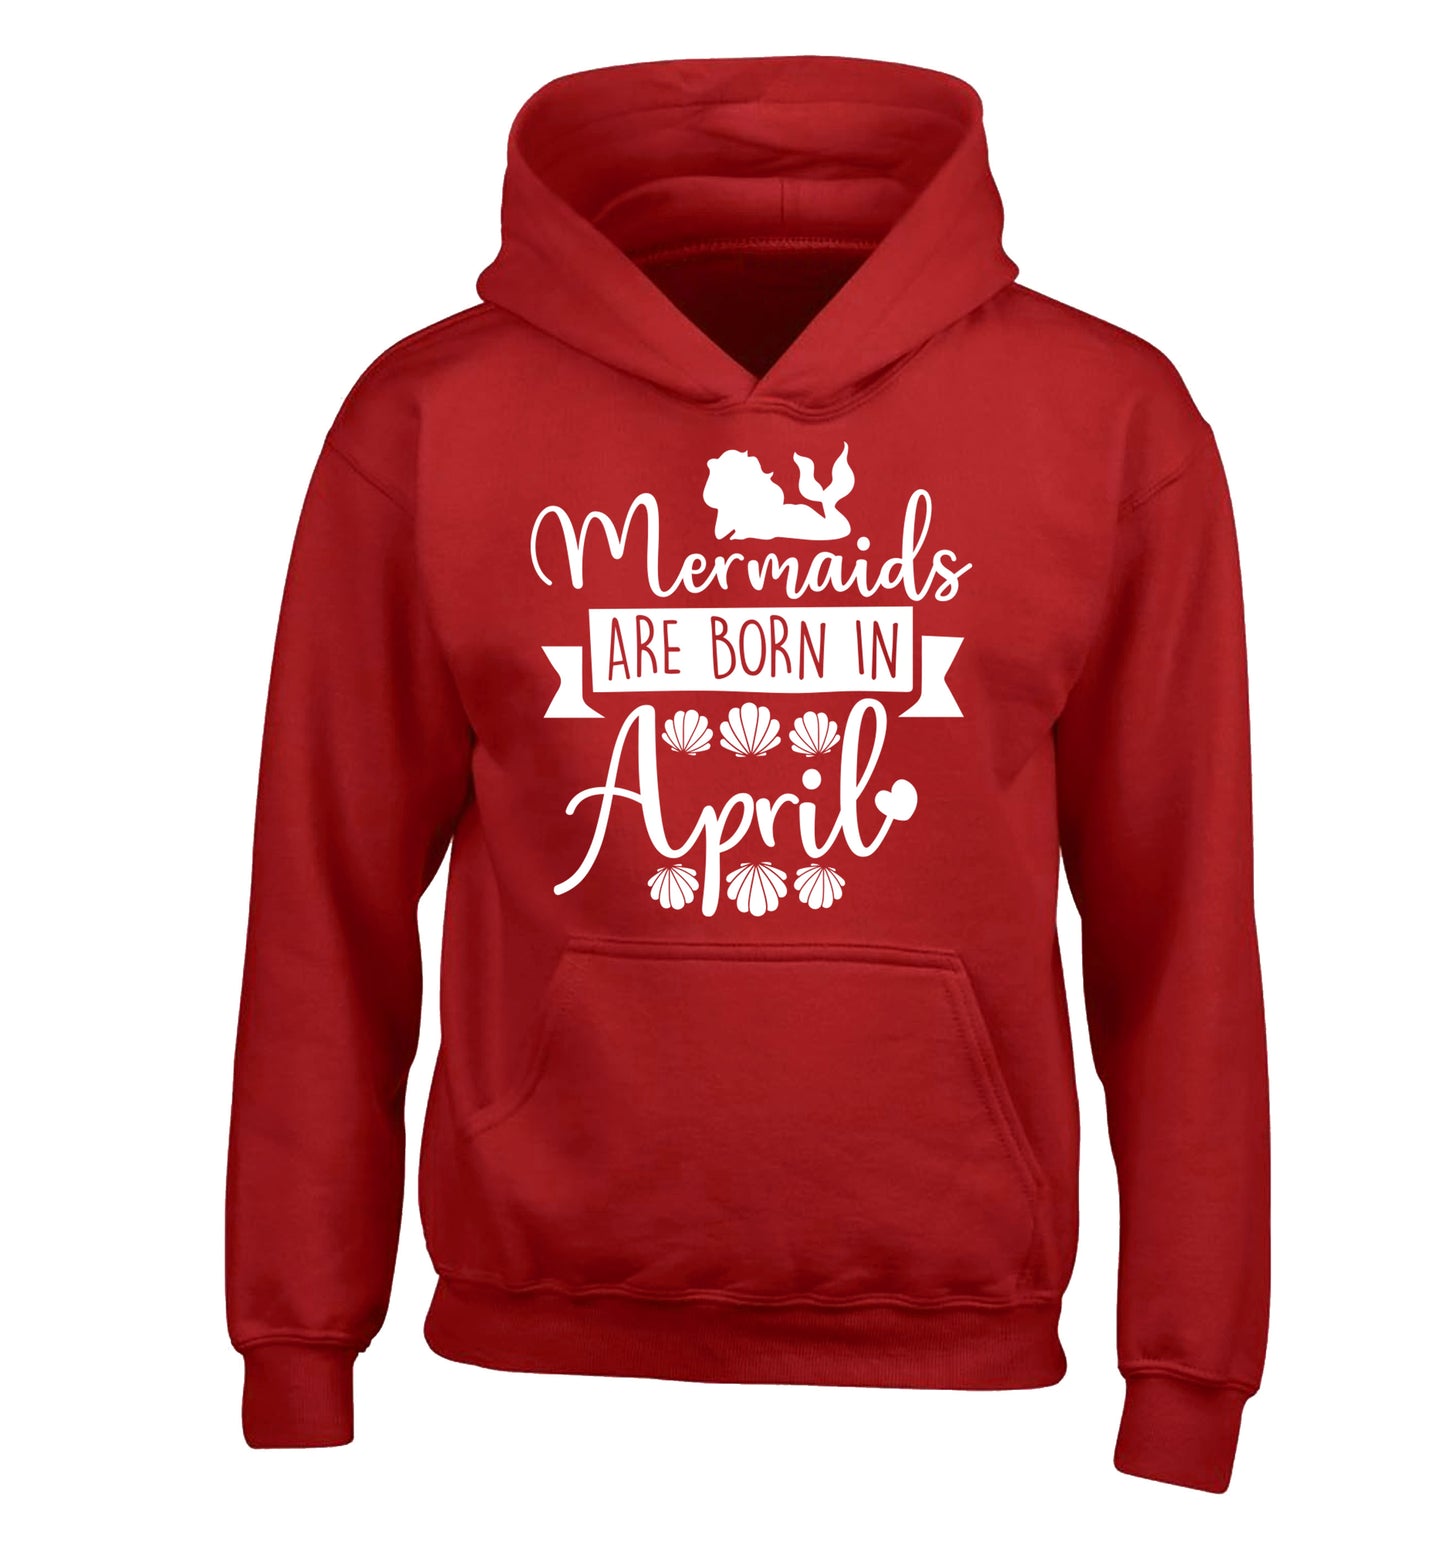 Mermaids are born in April children's red hoodie 12-13 Years